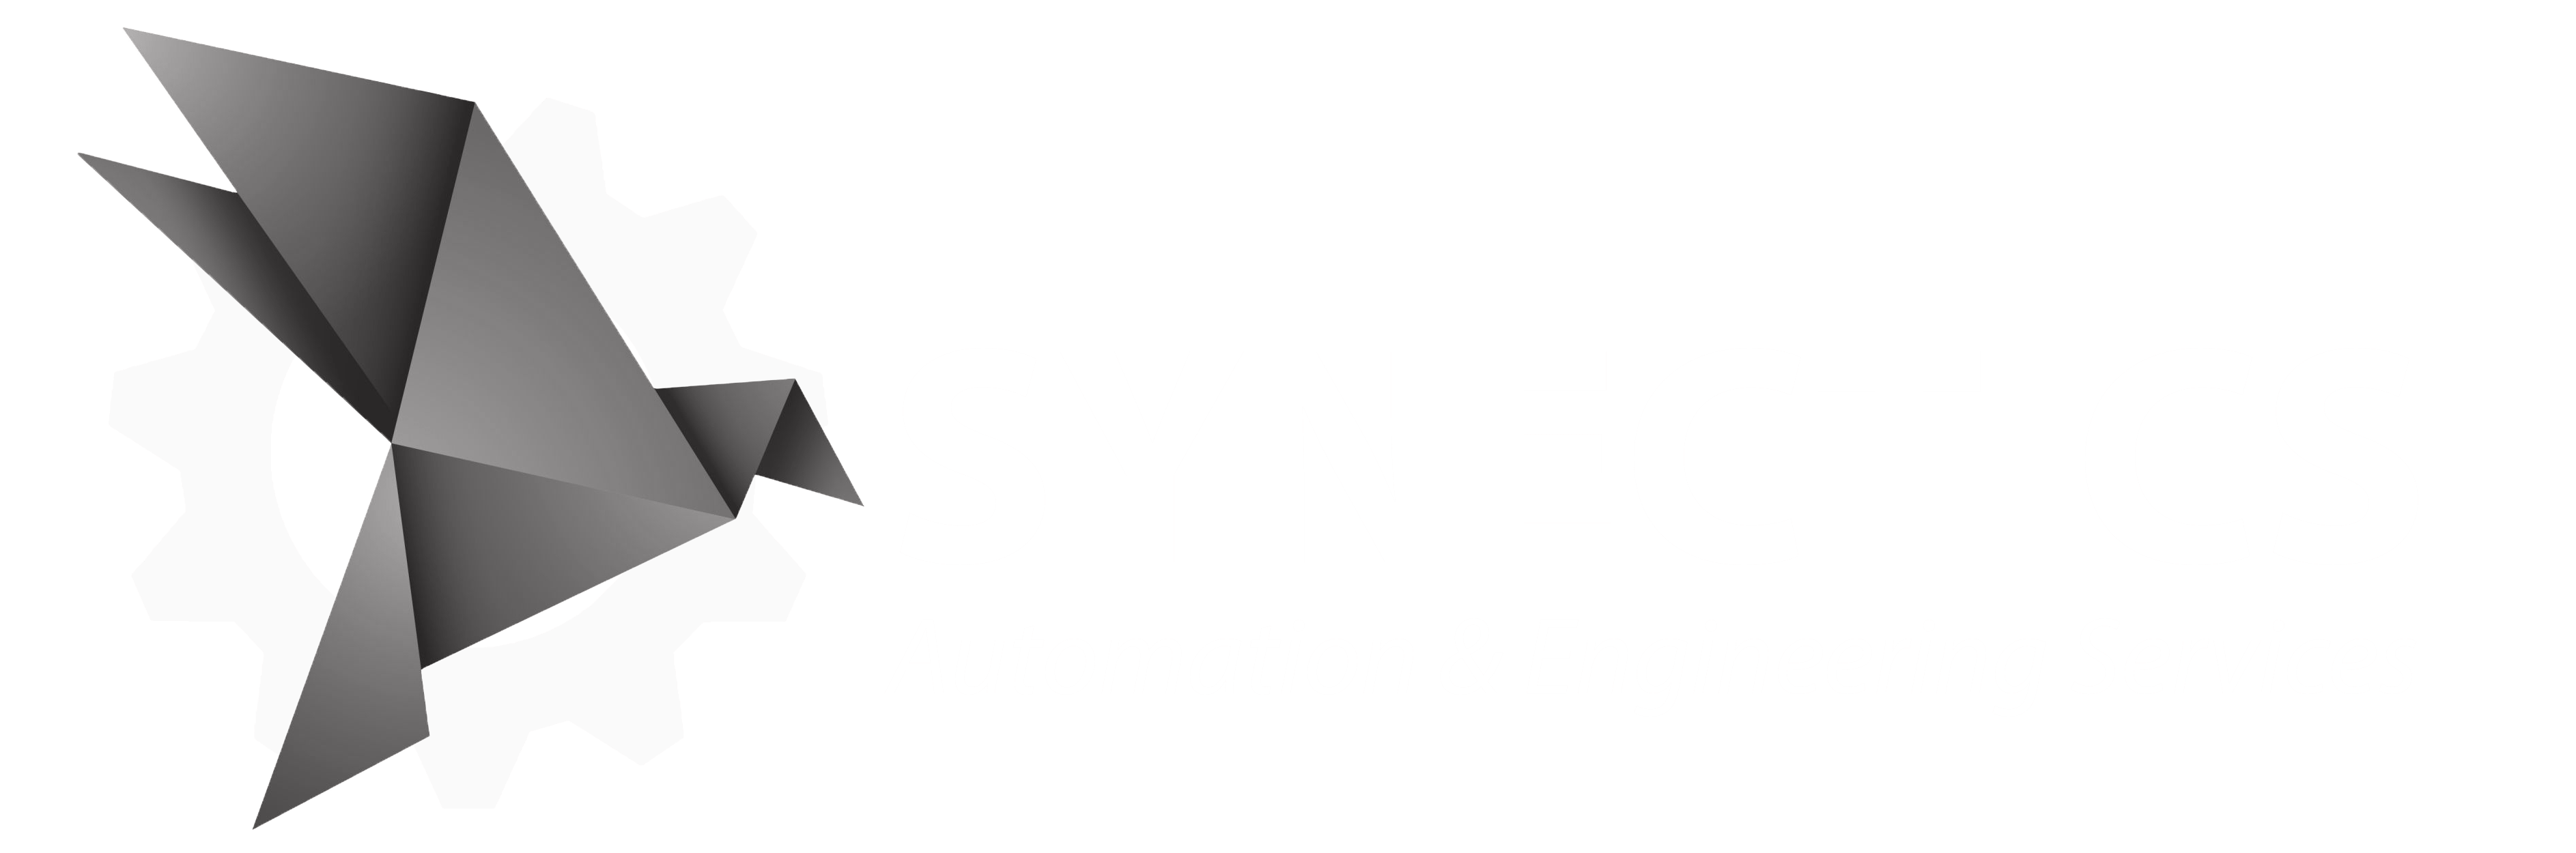 Synectics Automation & Engineering Services